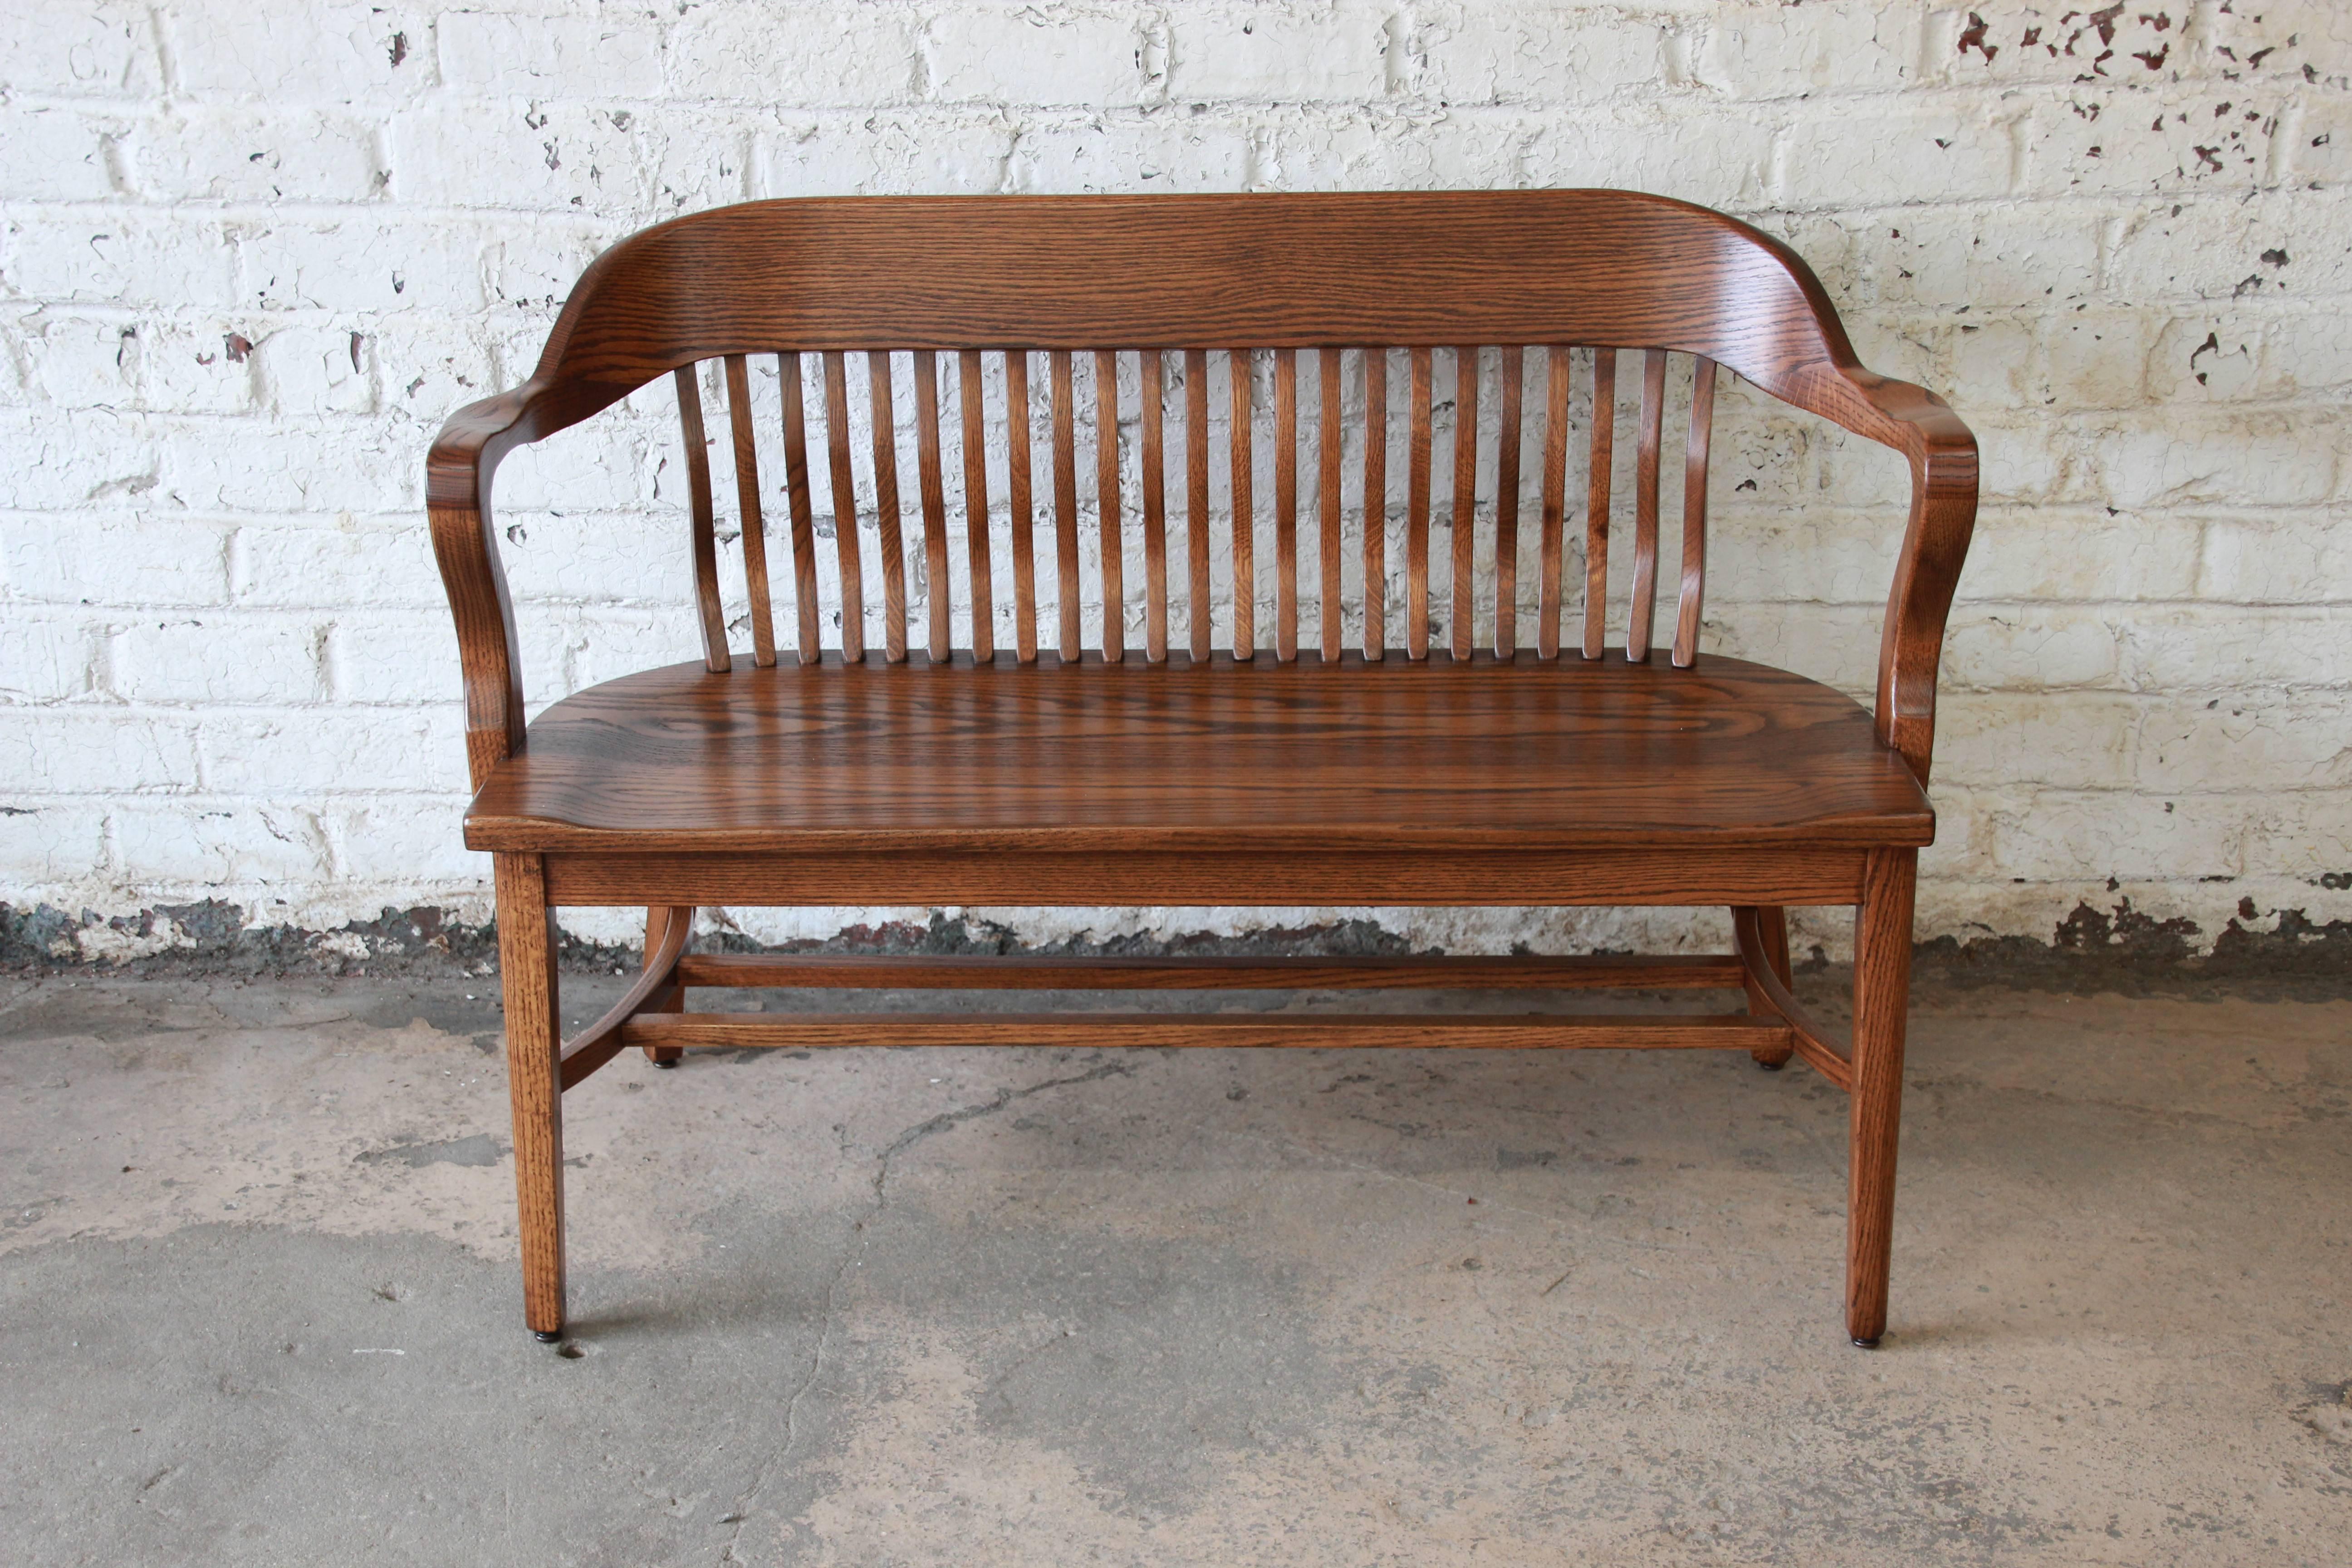 Offering a very nice newly refinished bankers bench in solid oak. The bench has beautiful wood grain and is constructed with quality craftsmanship and detail. The curved back with spindles and armrest provide great comfort on the versatile piece.